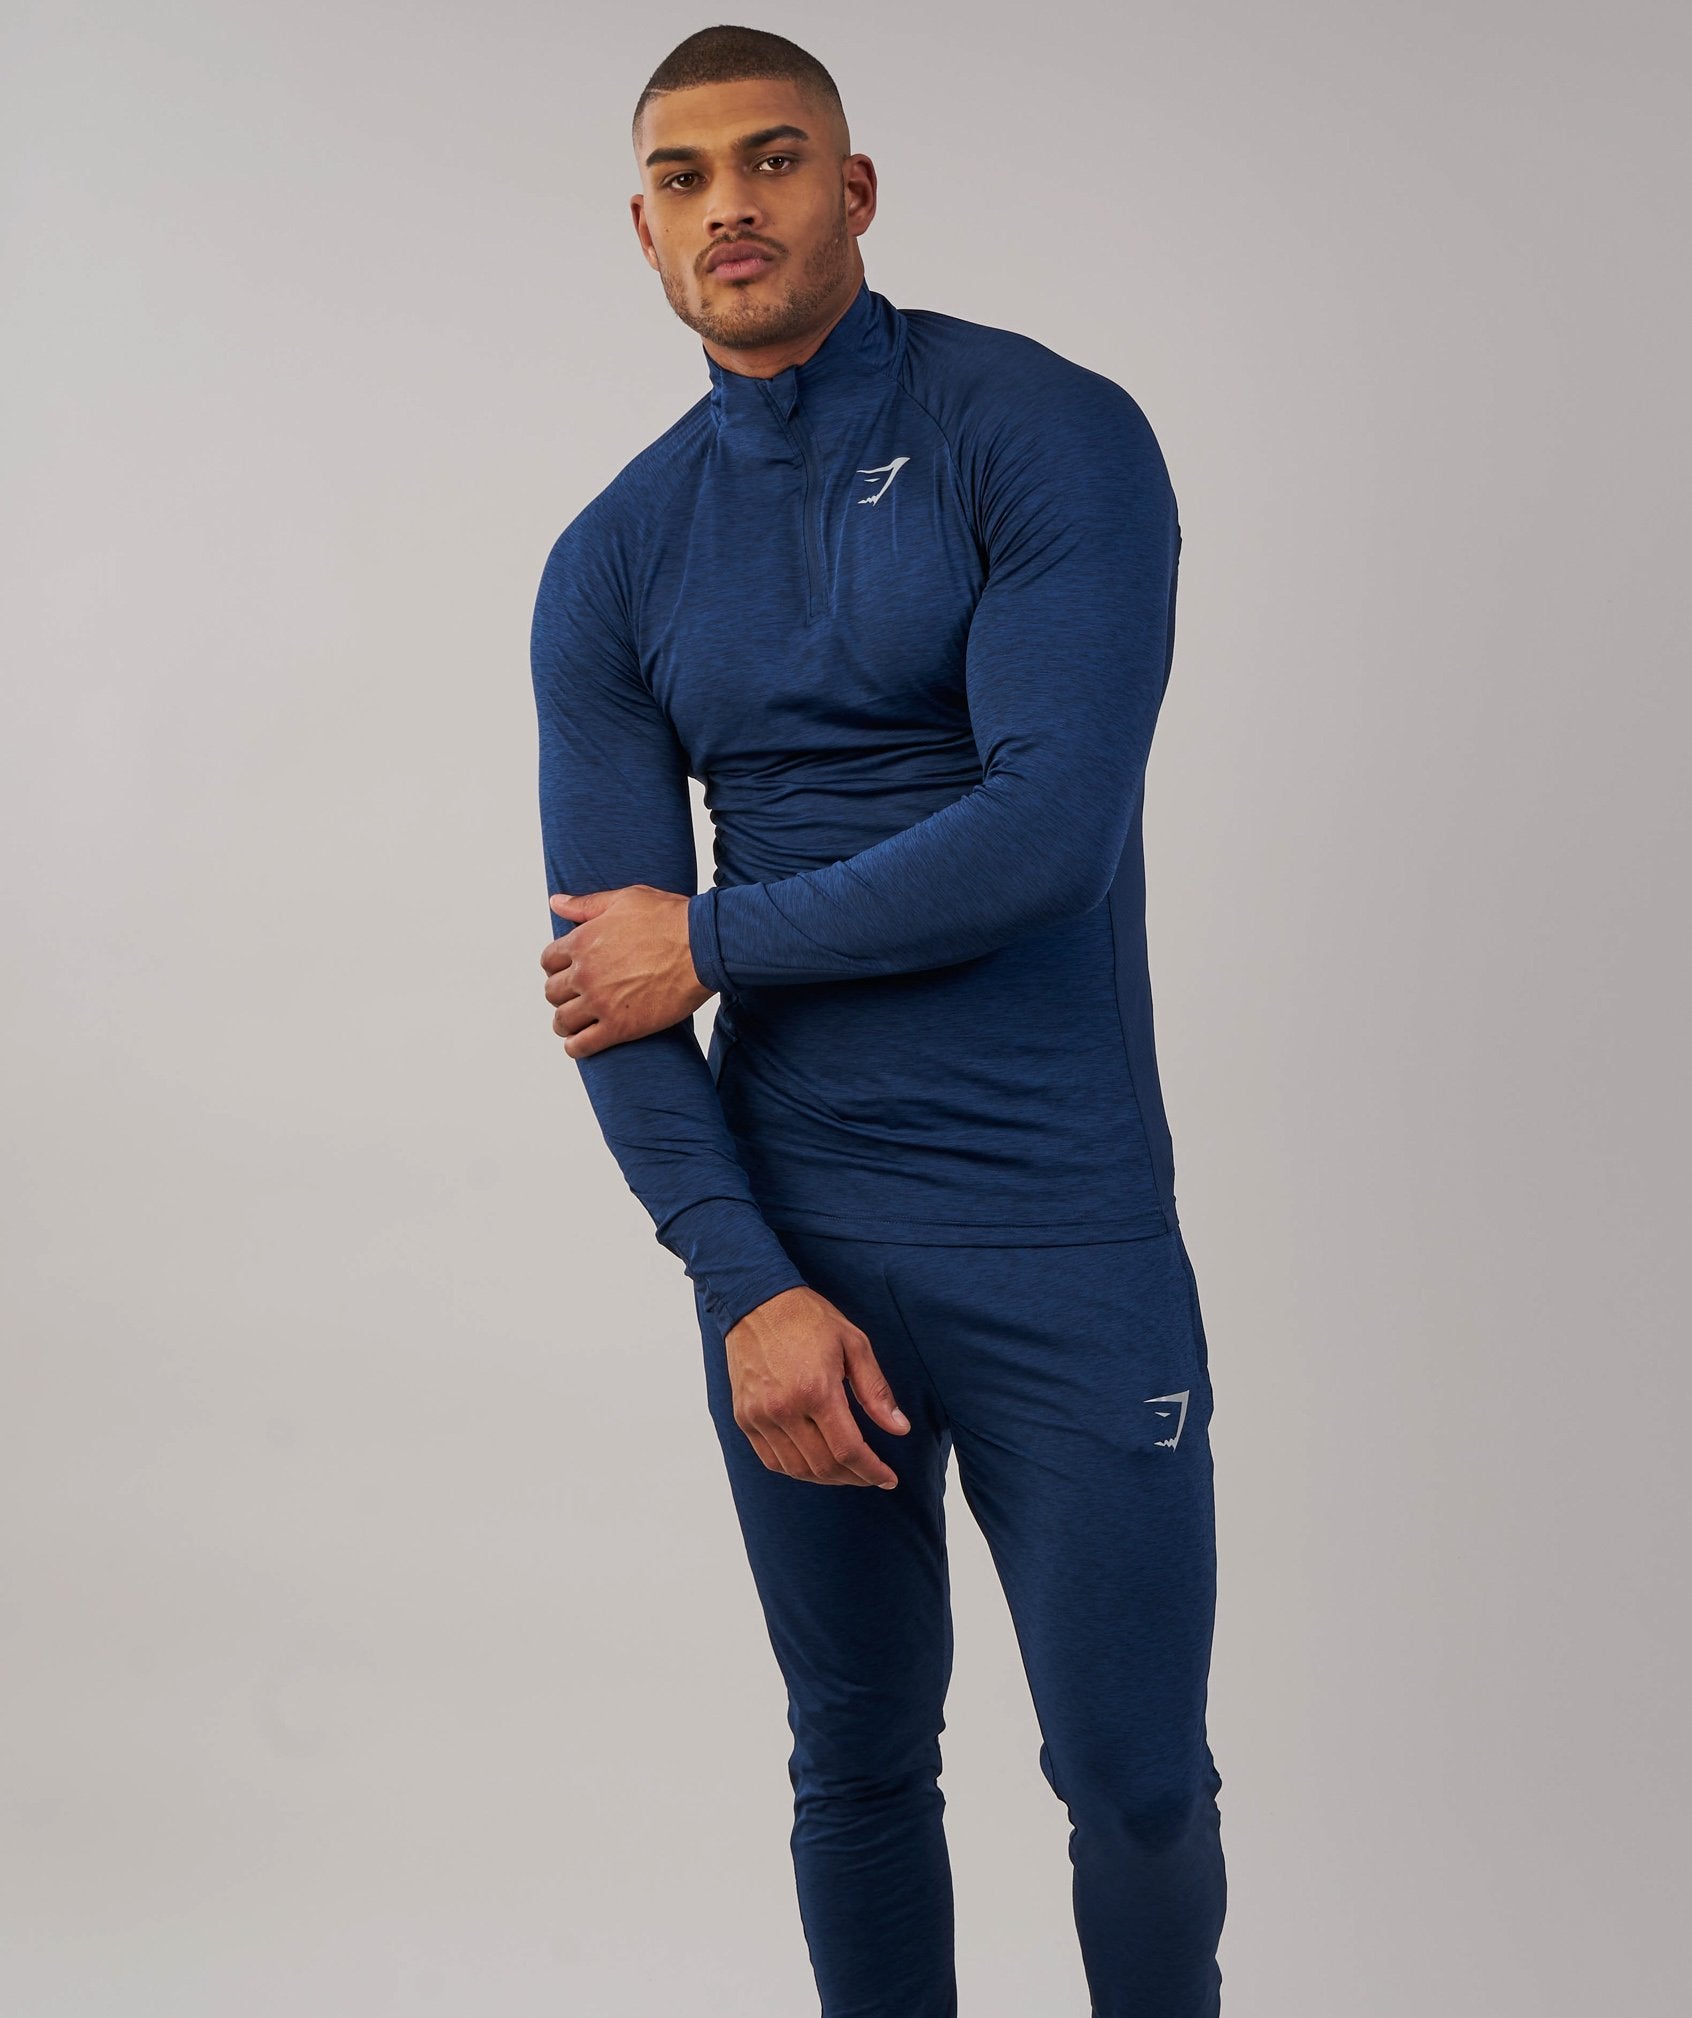 Fallout 1/4 Zip Pullover in Sapphire Blue Marl - view 4